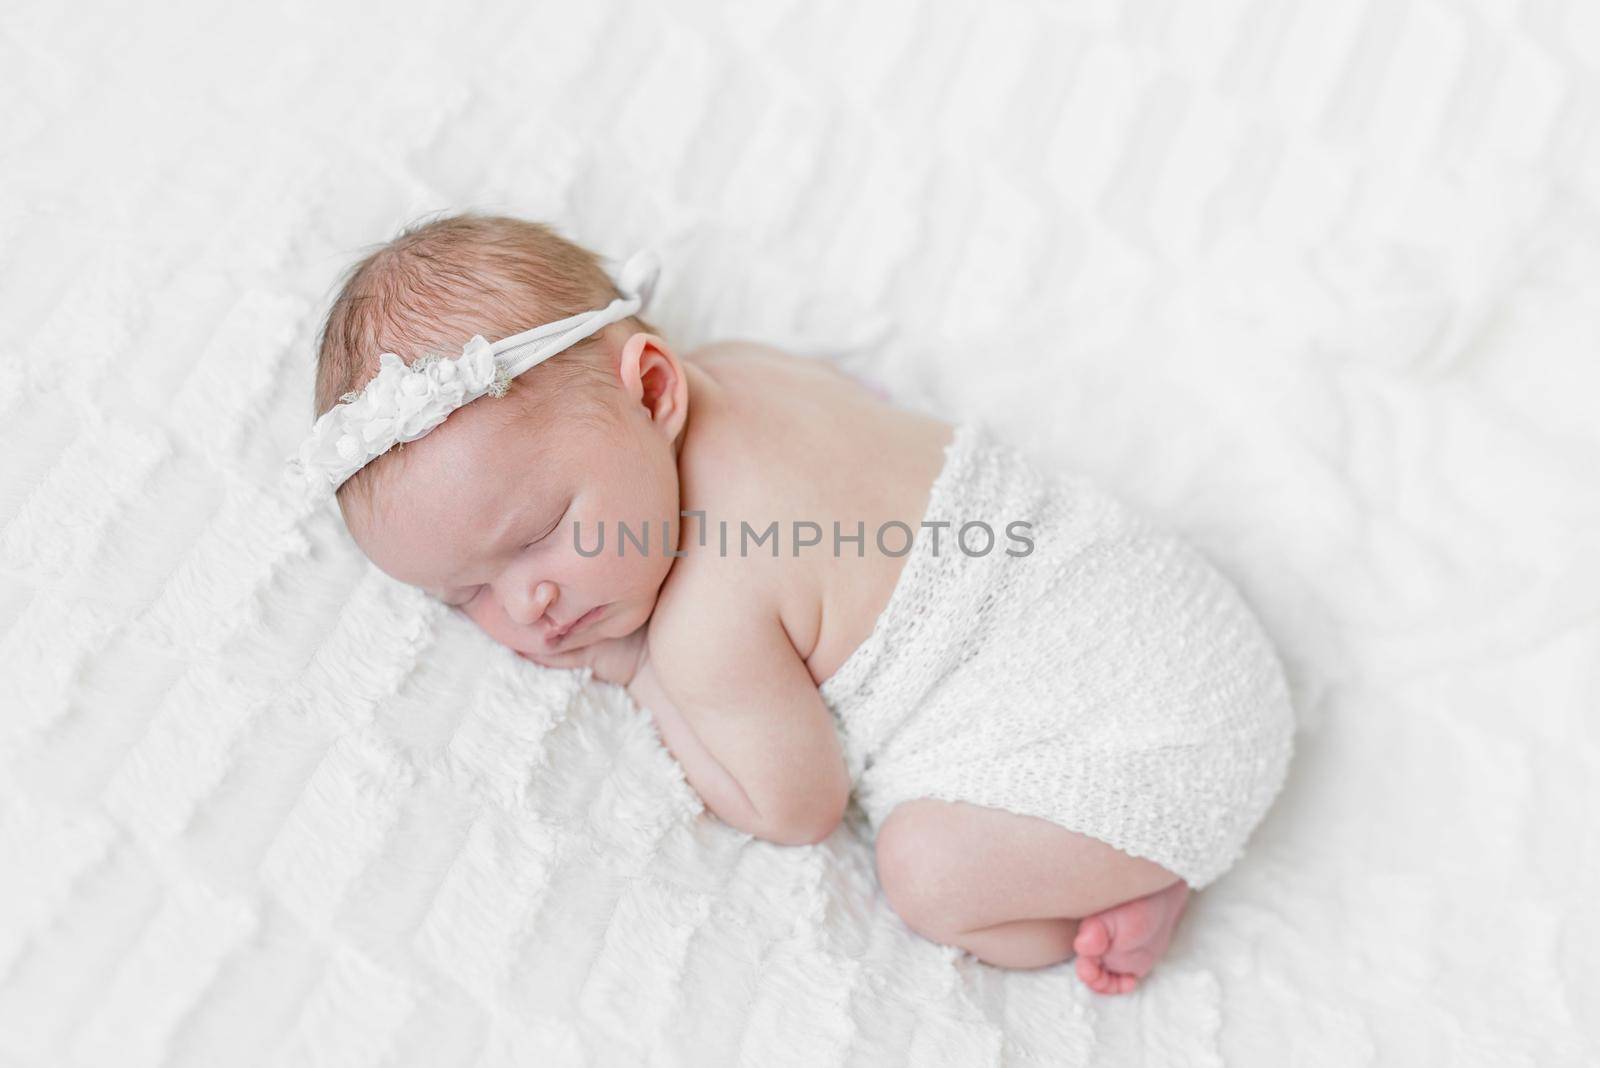 Cute baby sleeping on her belly, wrapped up and wearing a flower band